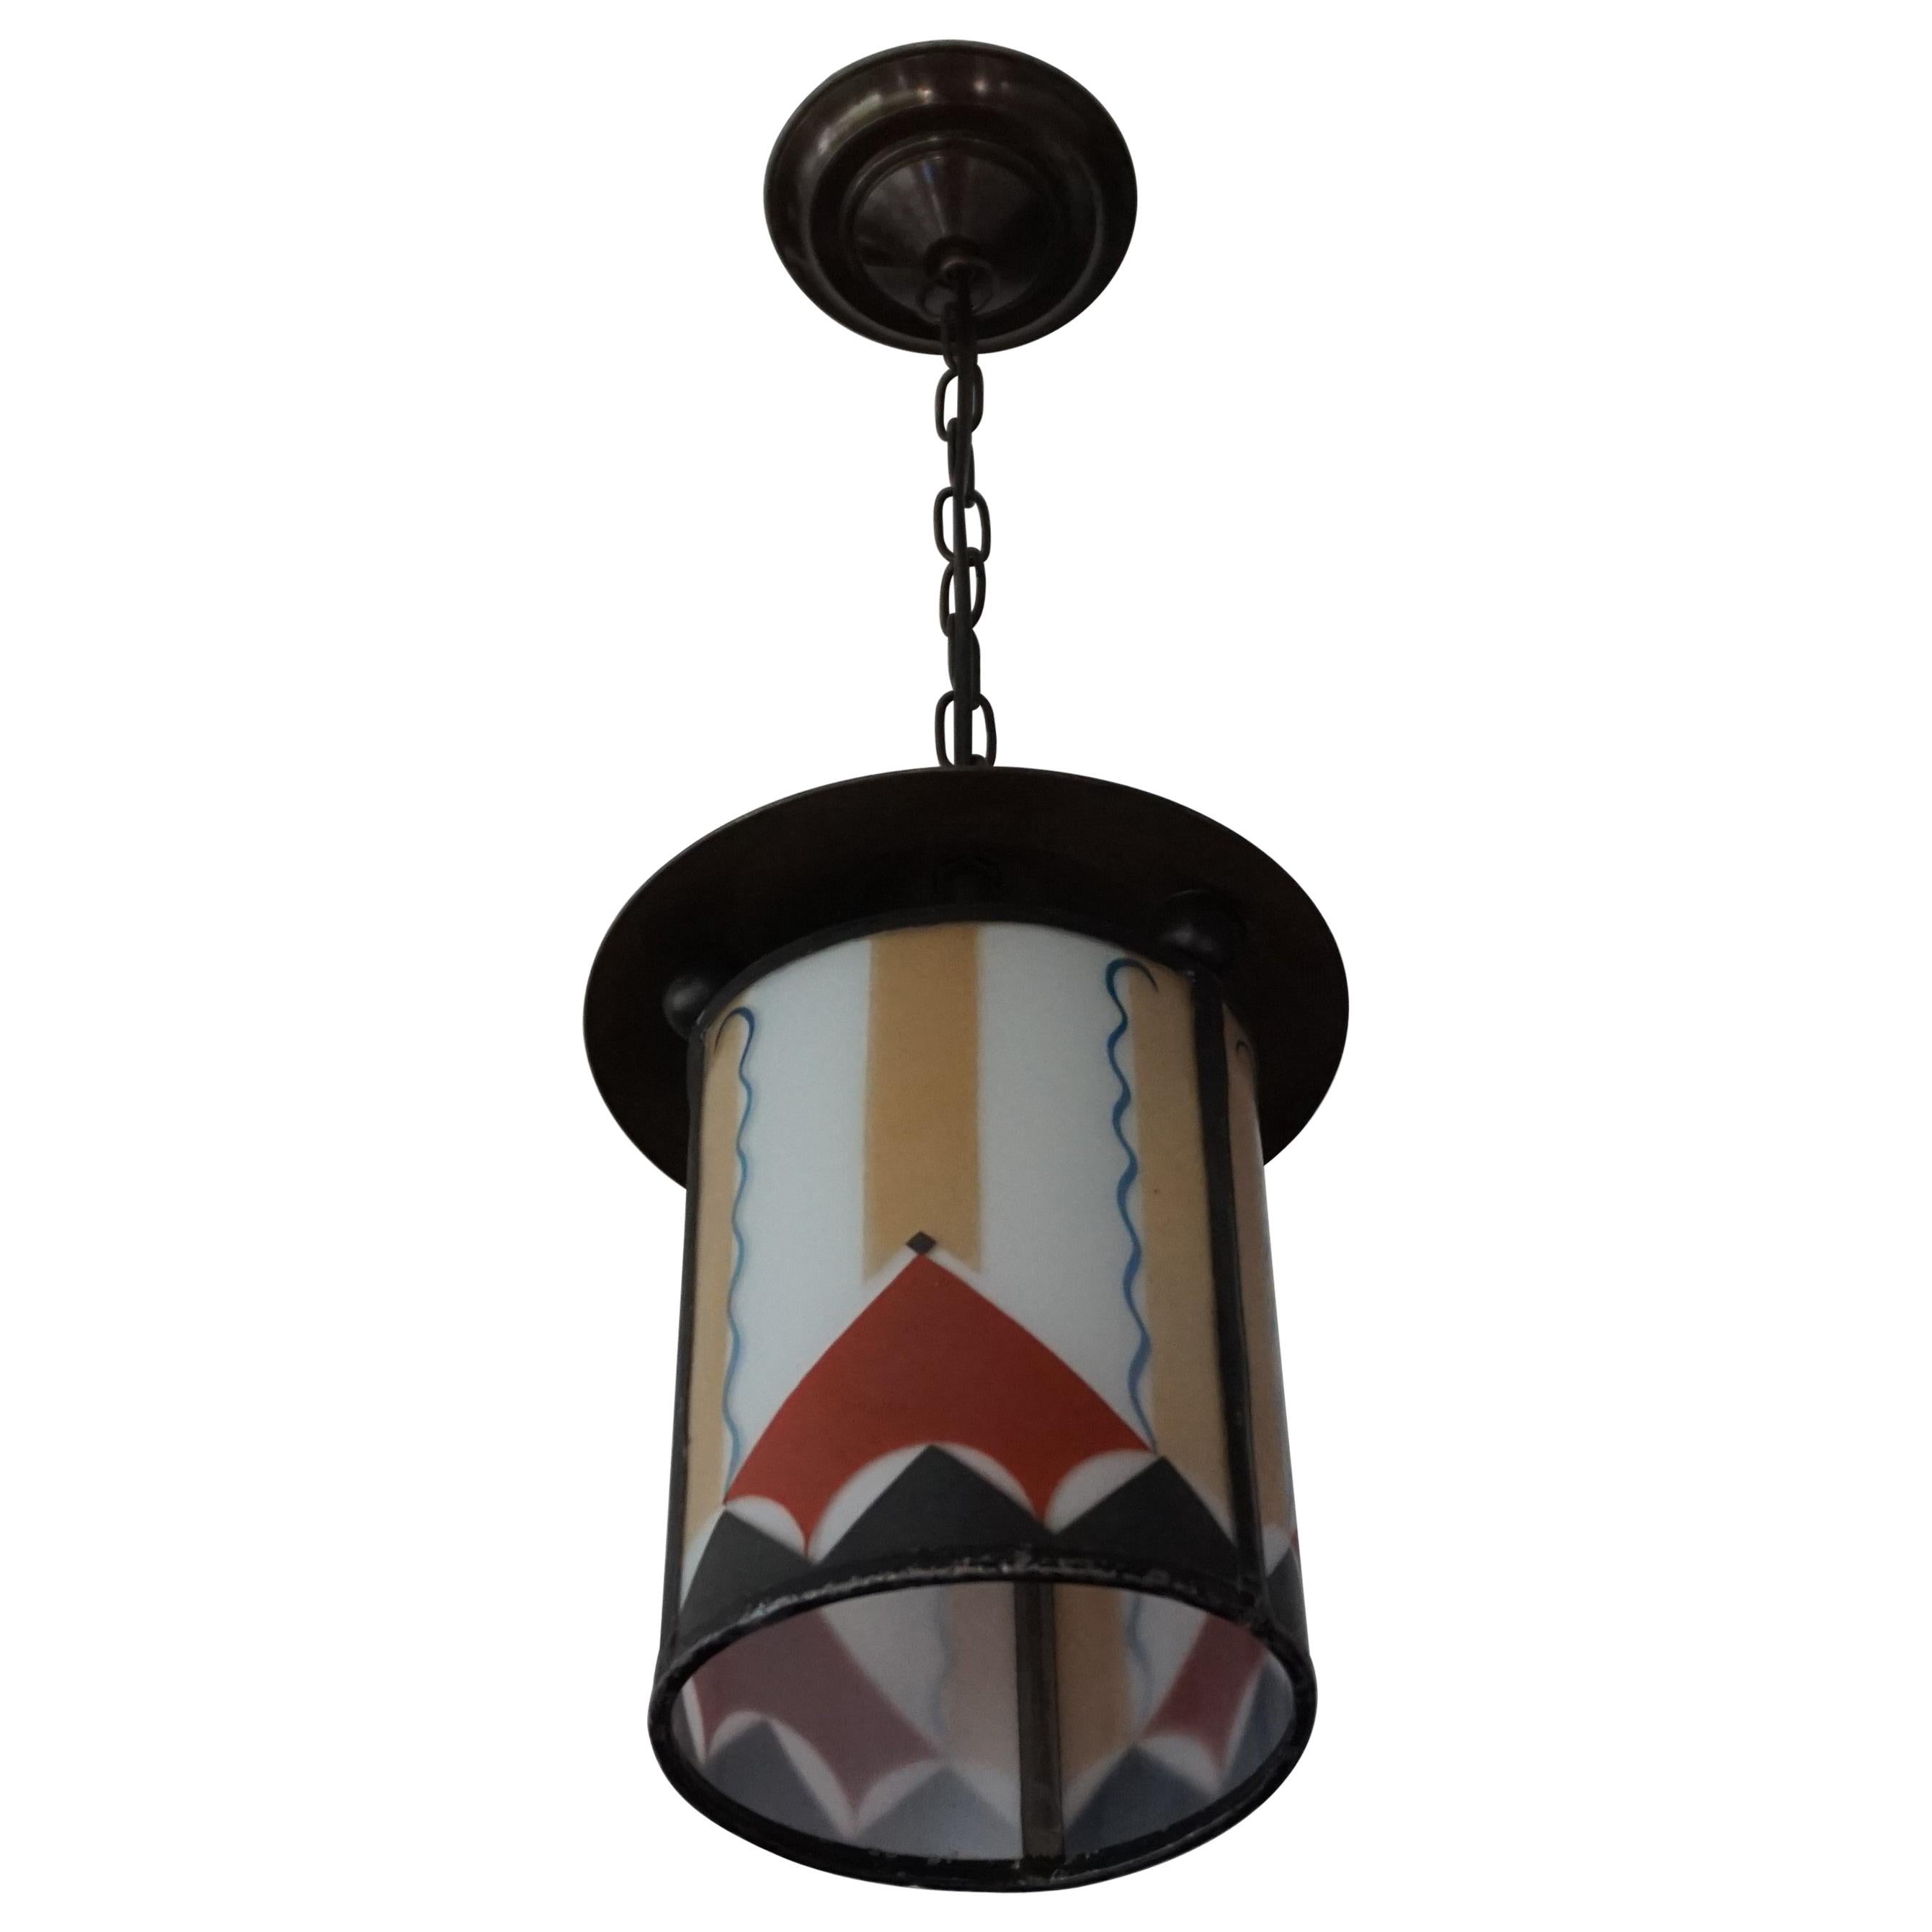 Dutch Arts & Crafts Stained Glass and Brass Entrance or Hallway Pendant Light